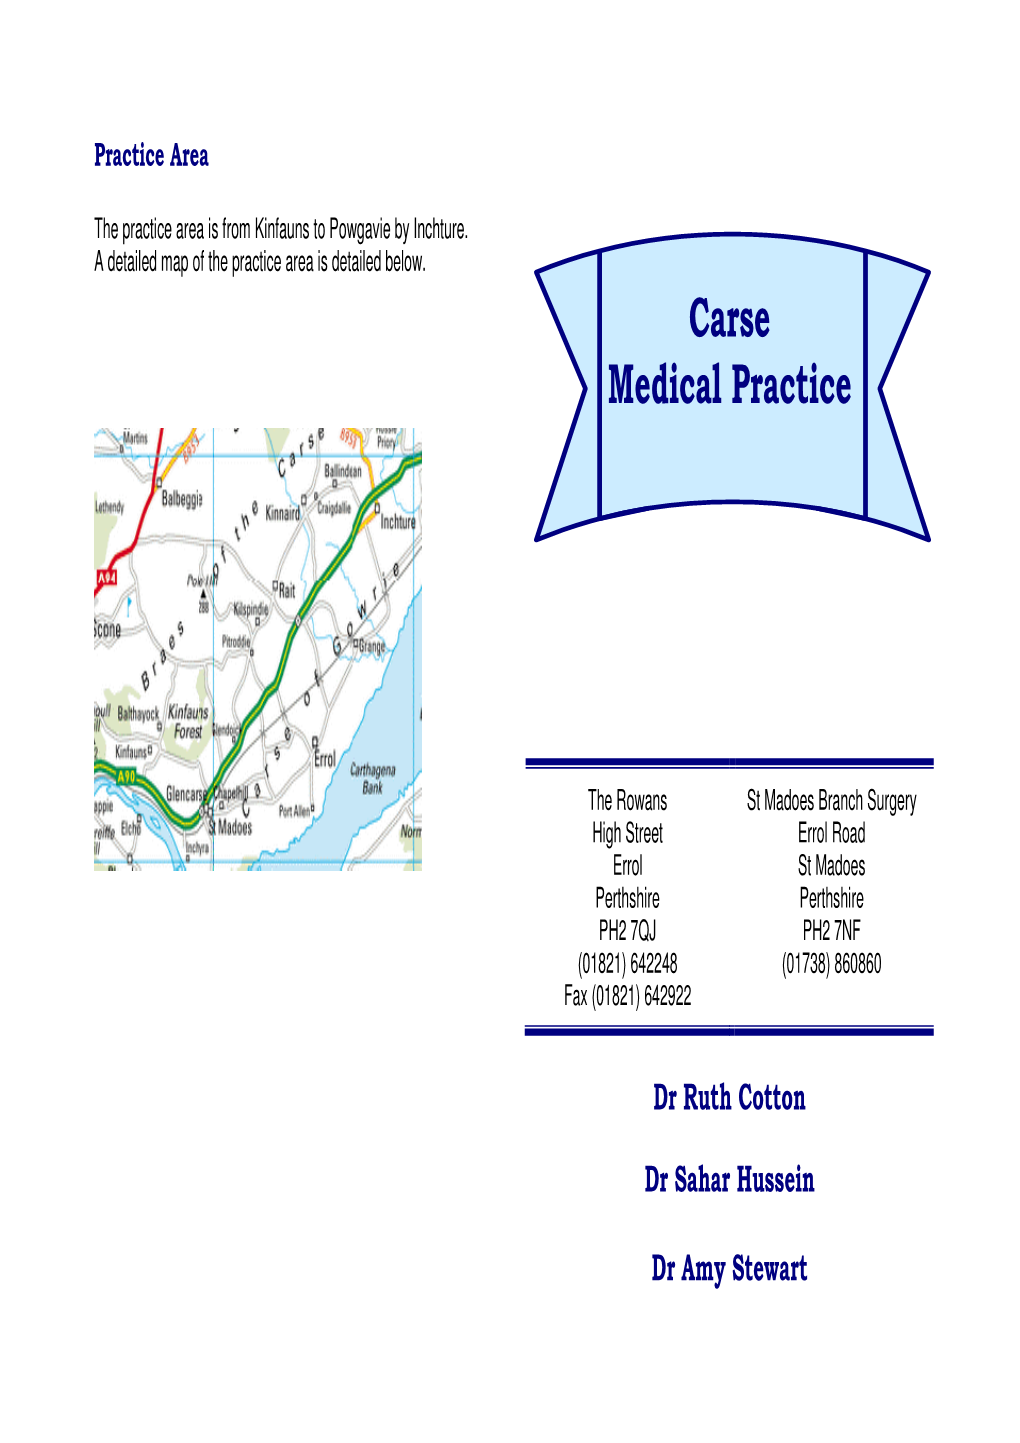 Carse Medical Practice